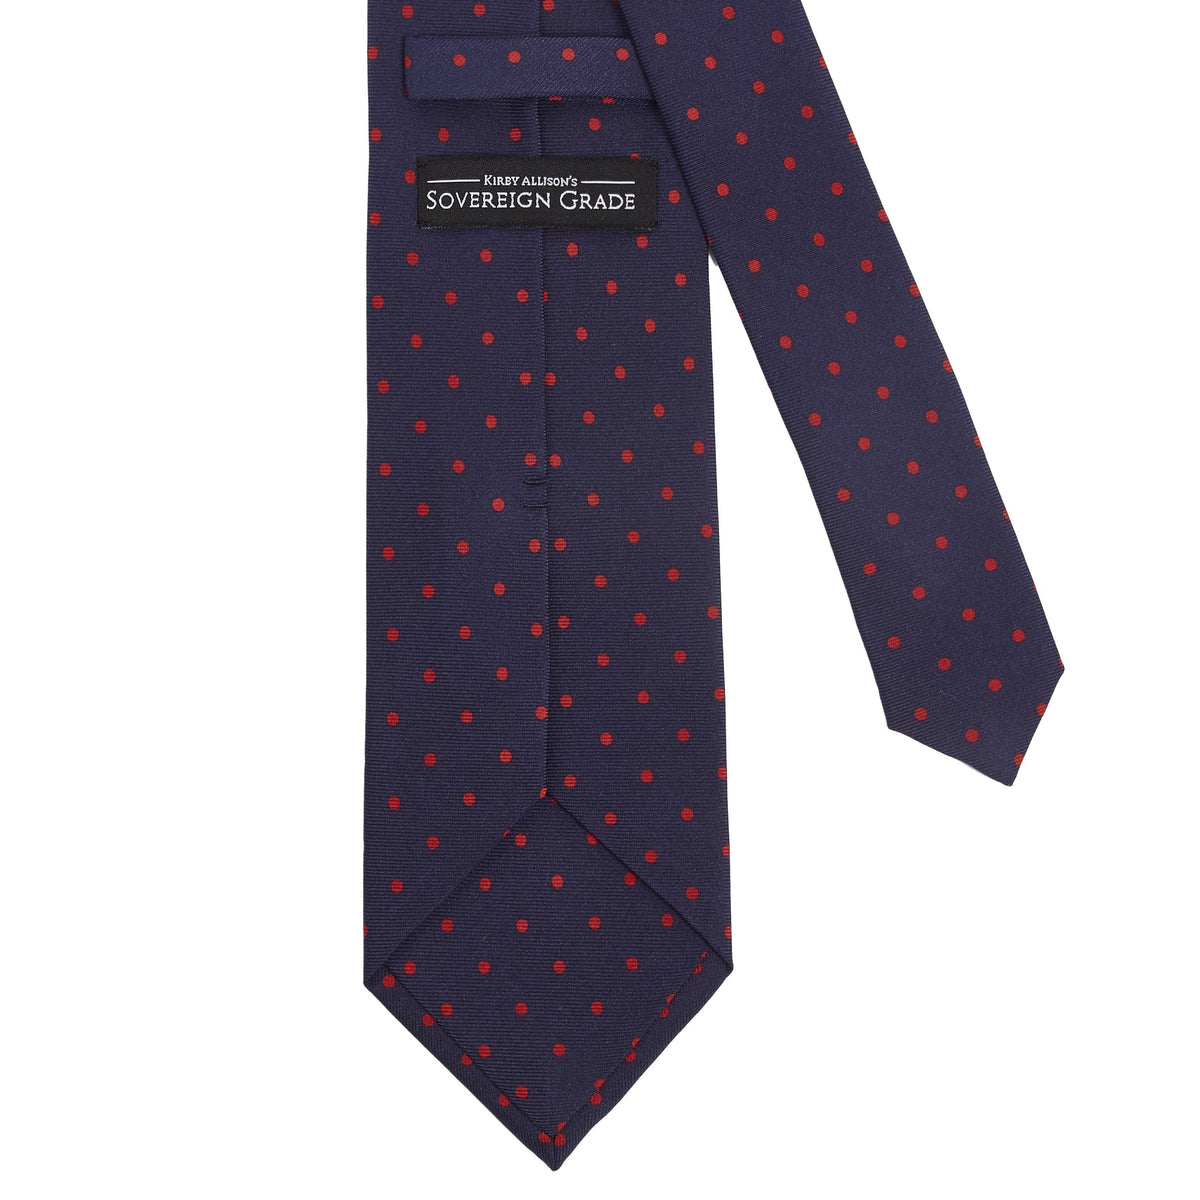 A Sovereign Grade Navy-Red London Dot Printed Silk Tie with red and blue polka dots, from KirbyAllison.com.